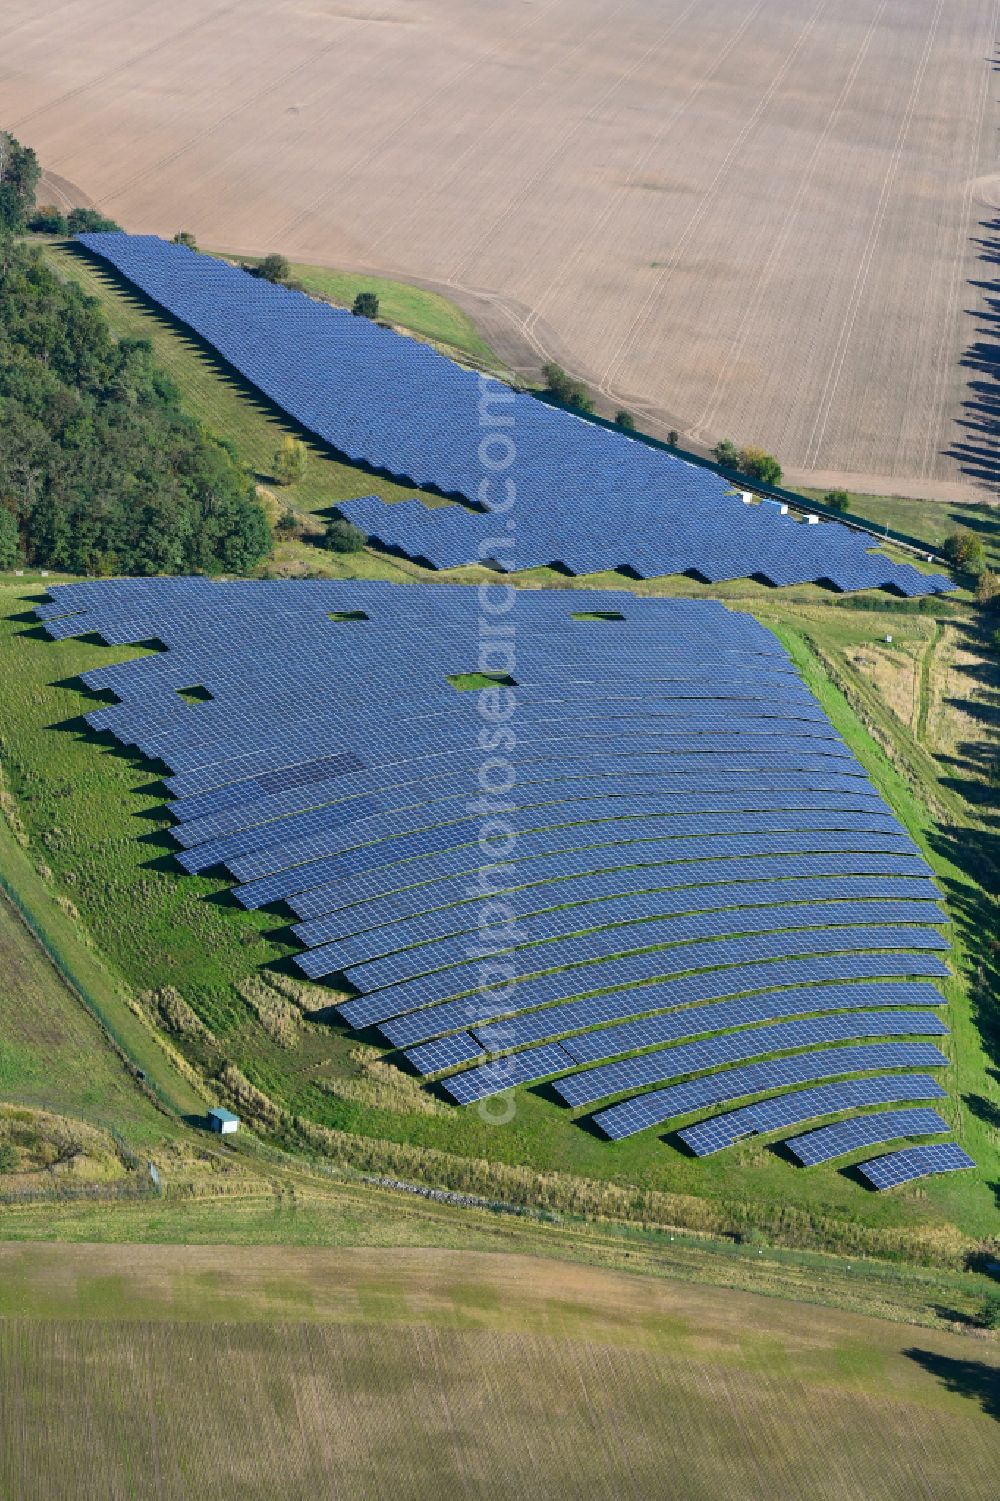 Werneuchen from the bird's eye view: Panel rows of photovoltaic and solar farm or solar power plant in Werneuchen in the state Brandenburg, Germany